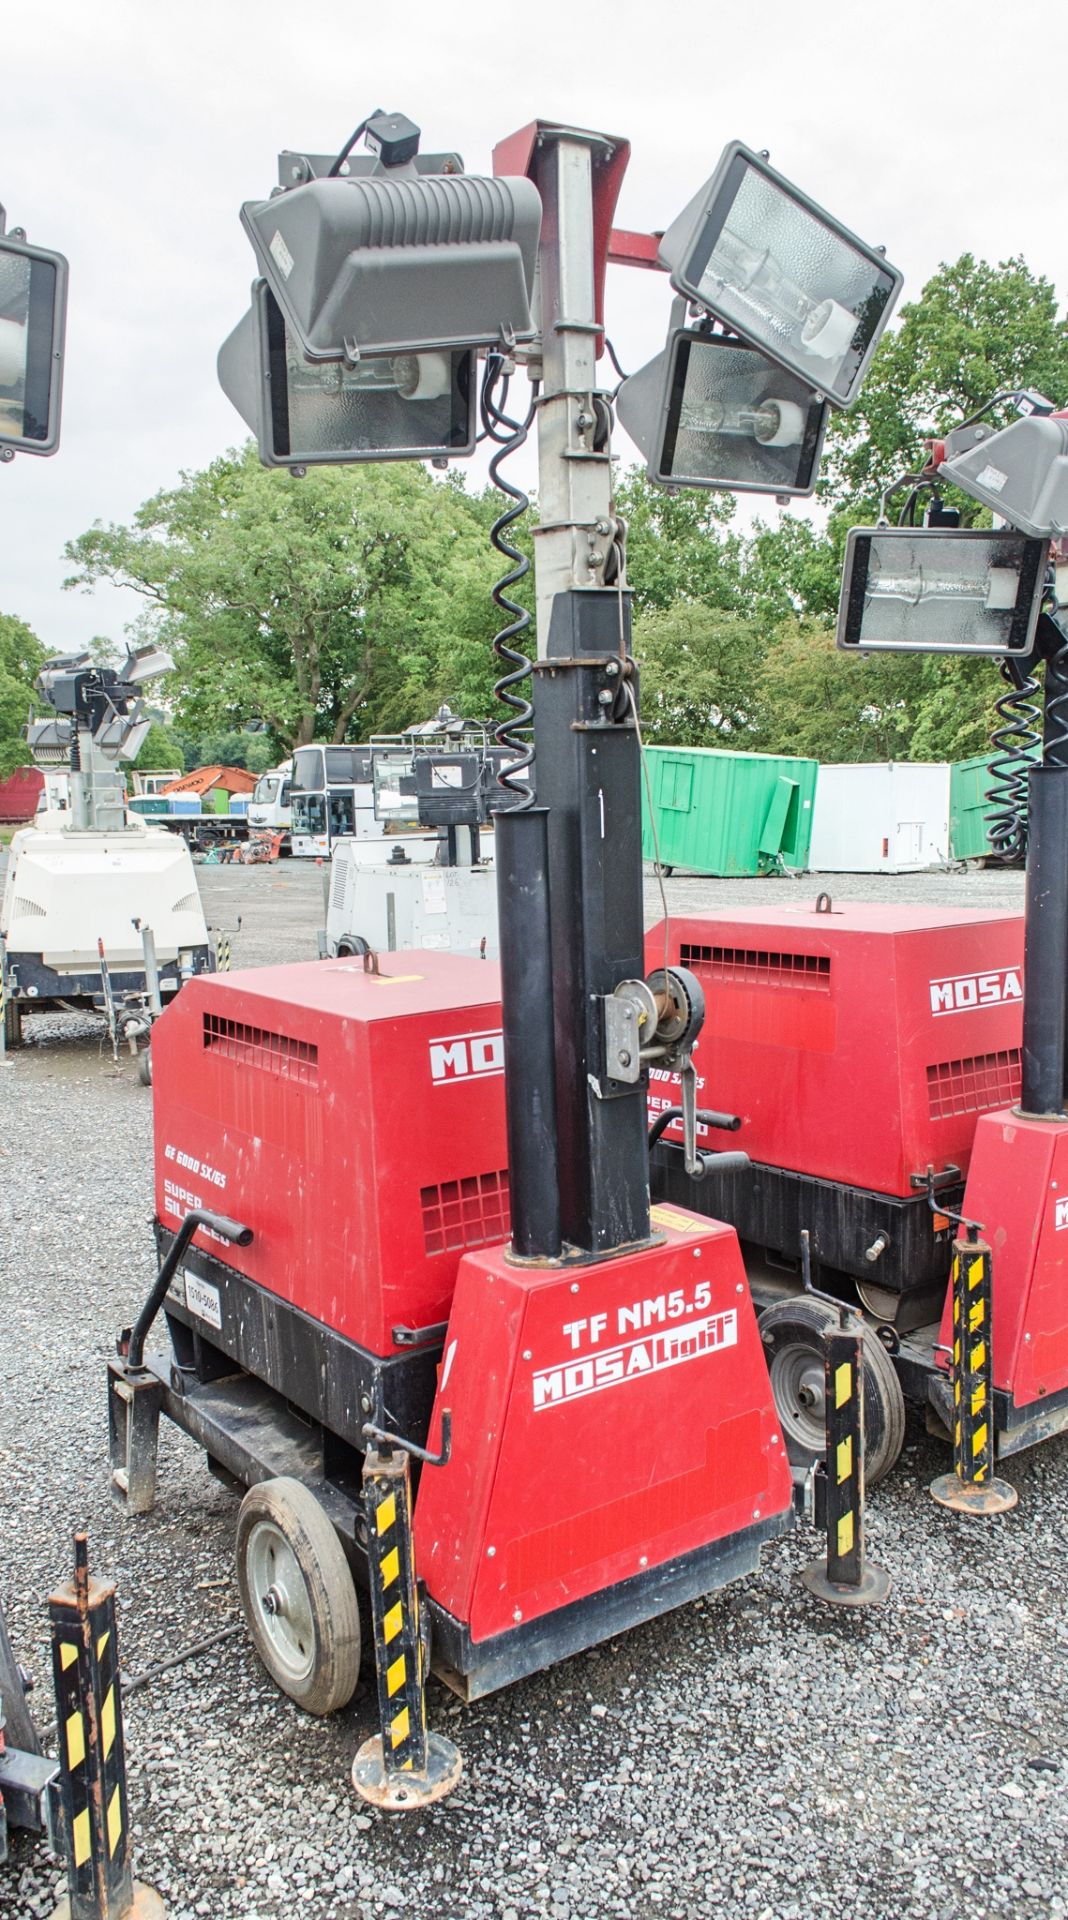 Mosa GE6000 SX/GS diesel driven lighting tower/generator Year: 2015 S/N: 045015 Recorded Hours: 1234 - Image 2 of 5